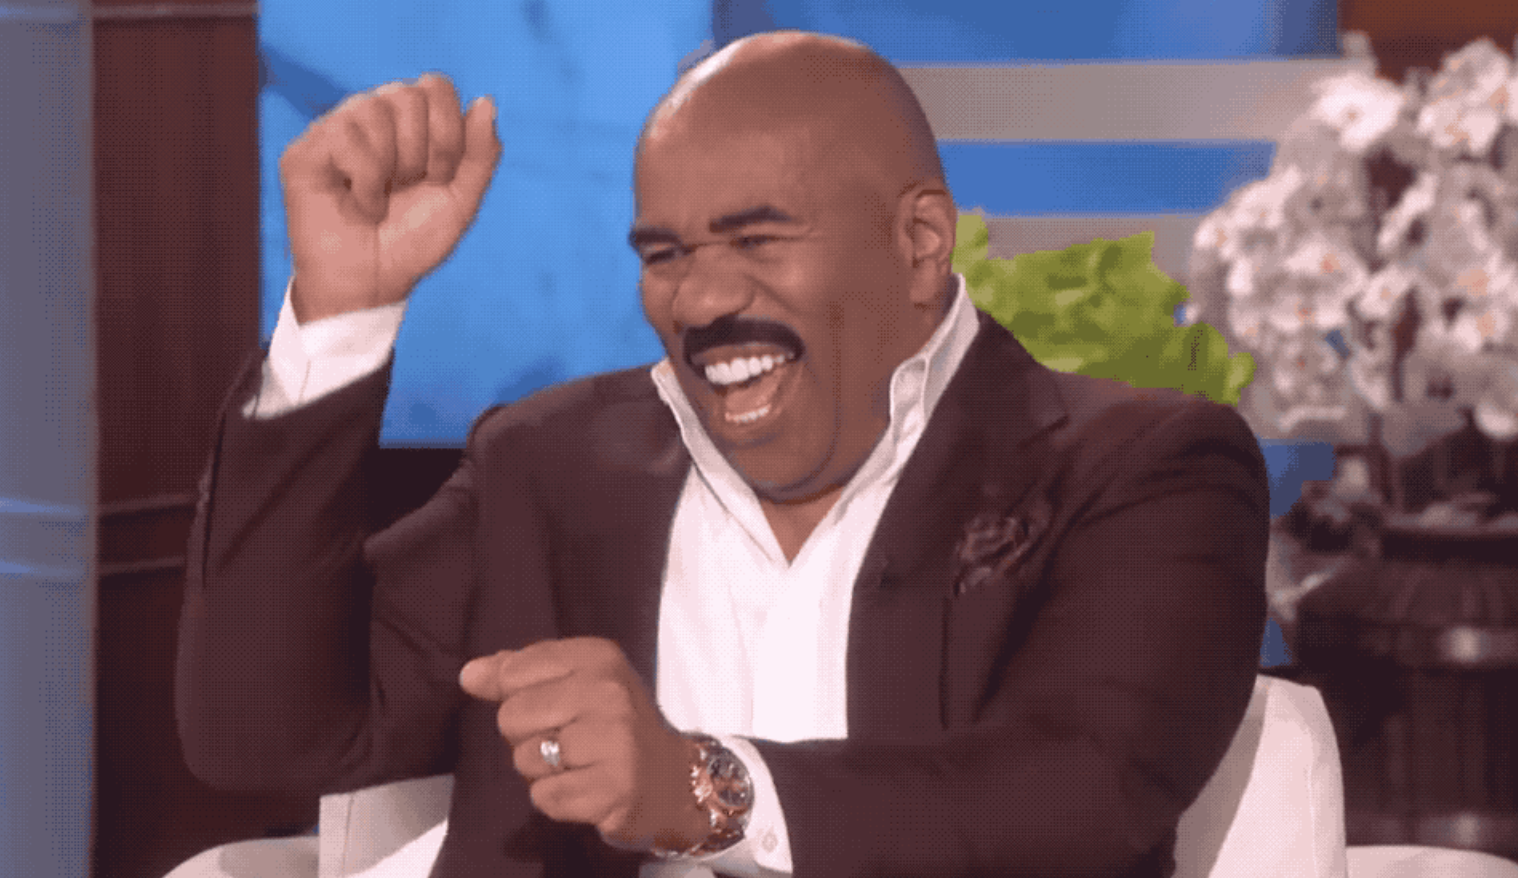 Steve Harvey smiling widely and raising his hands